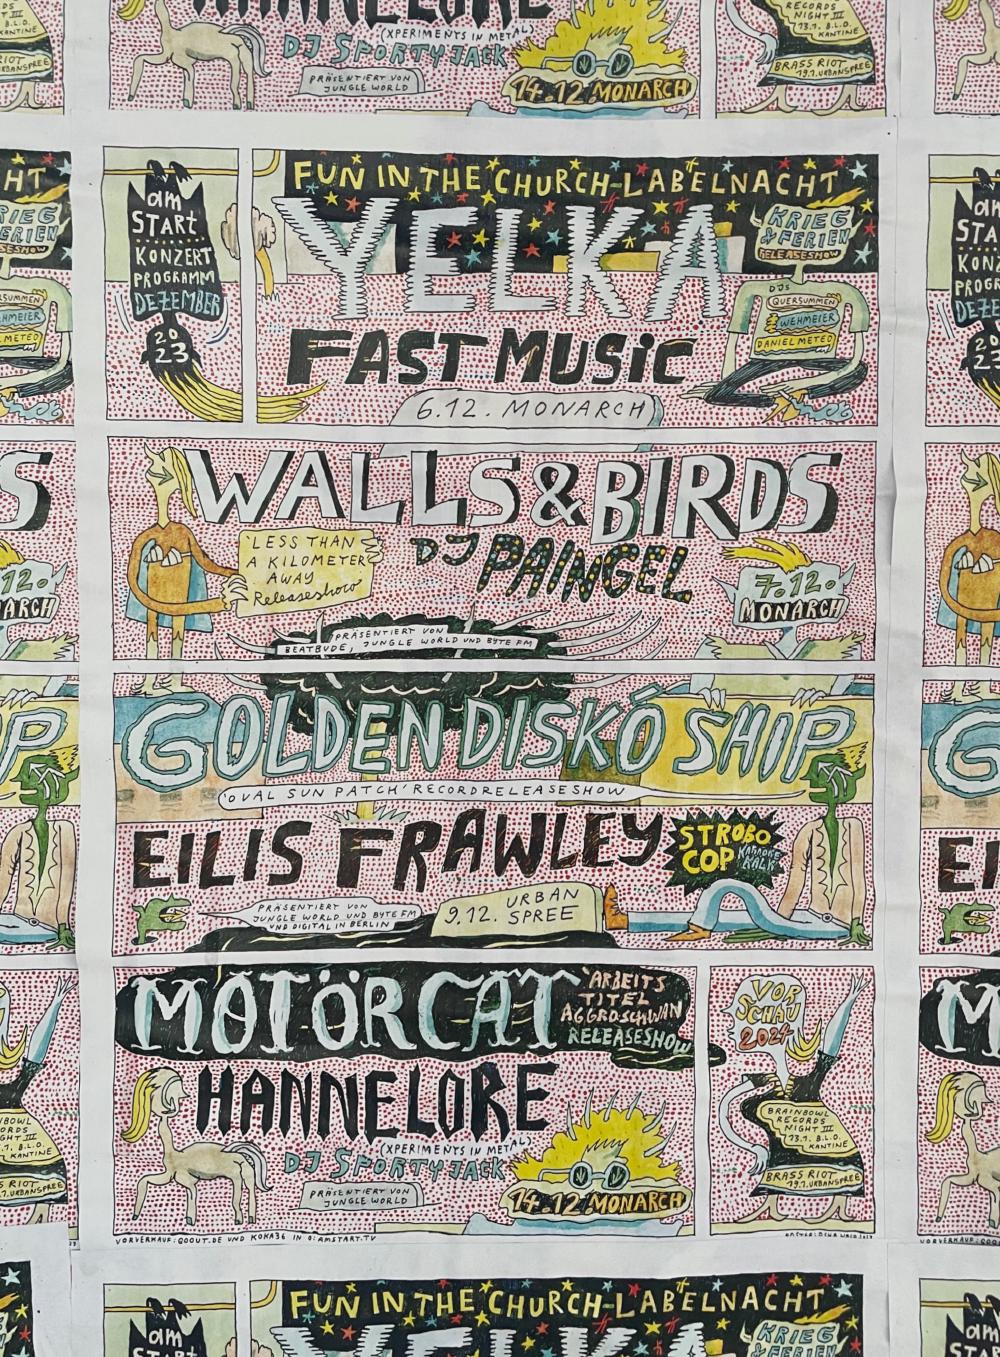 Hand-drawn style poster for Yelka Fast Music